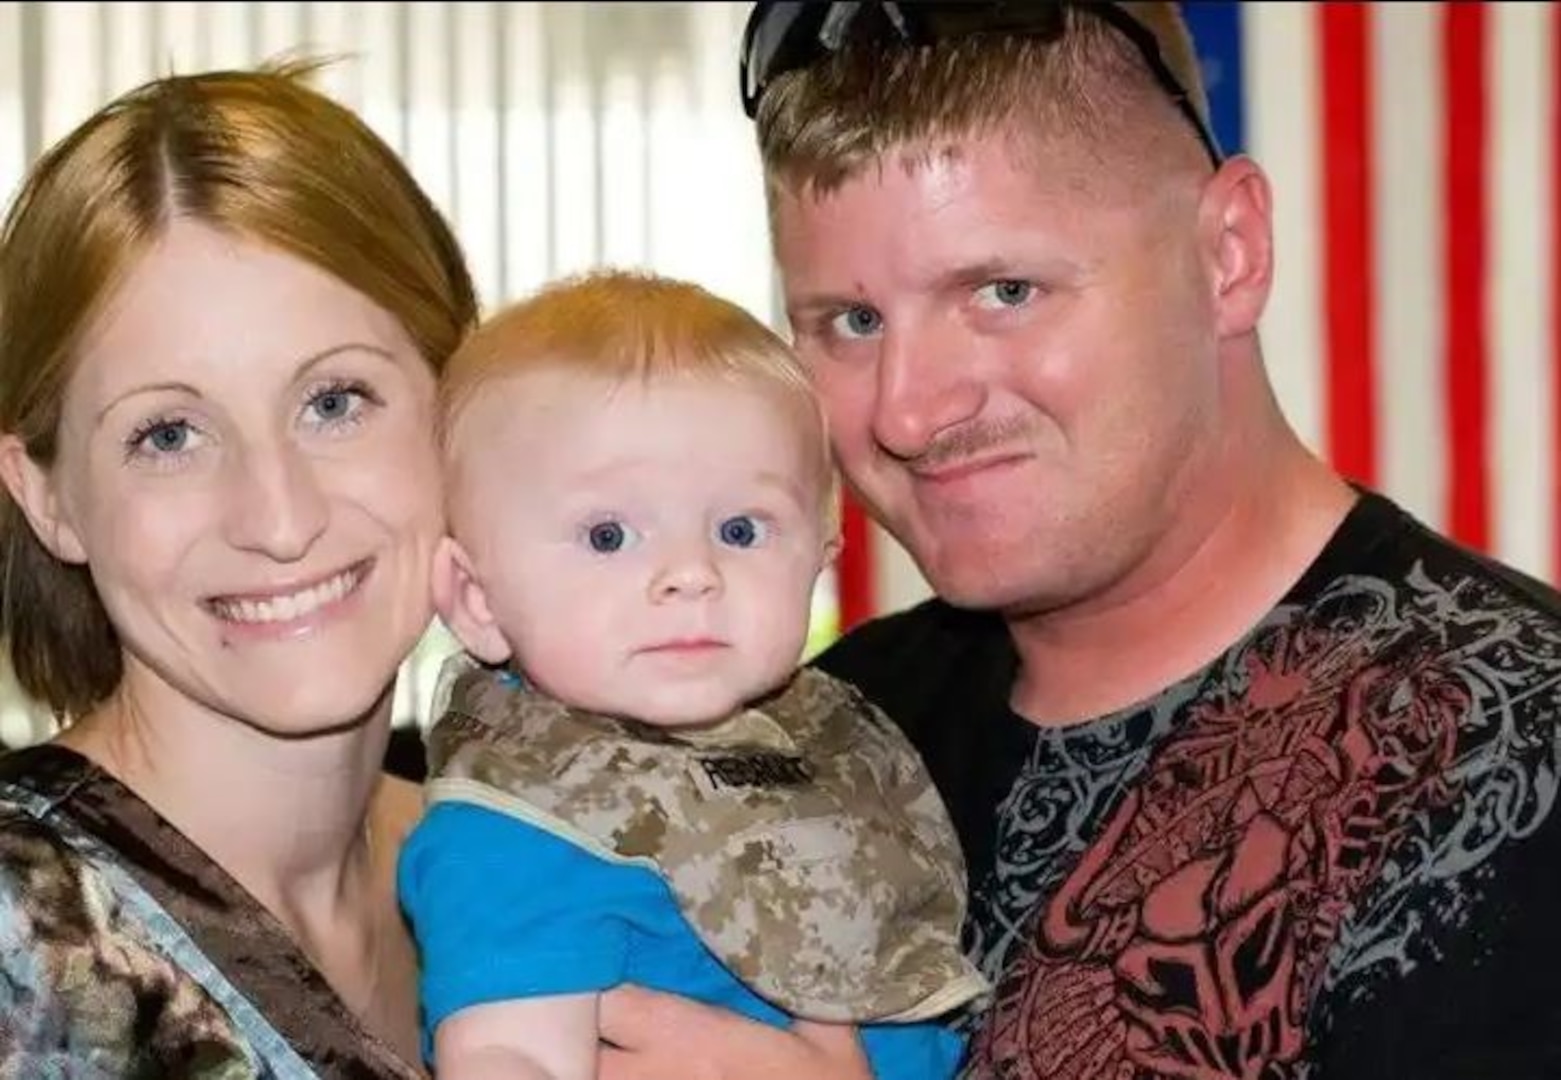 Pictured here is late Marine Corps Sgt. Christopher Jacobs, previously attached to Delta Company, 3rd Assault Amphibian Battalion in Twentynine Palms, California, his wife Brittany, and their son, Christian. Christopher was killed in a training accident in 2011 when Christian was eight-months-old.